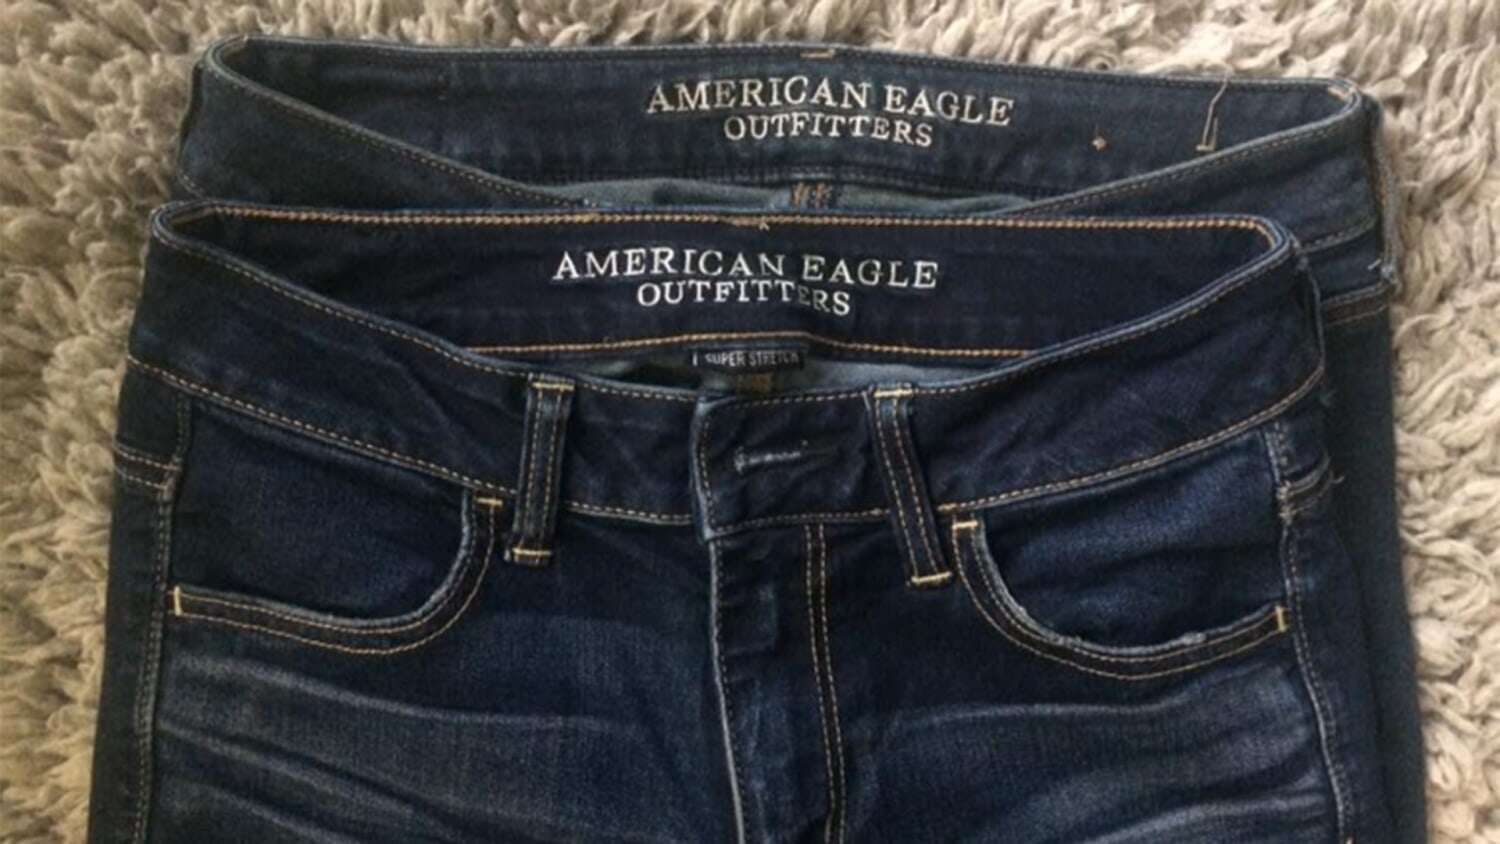  American Eagle Jeans Size Chart (Both Men and Women)